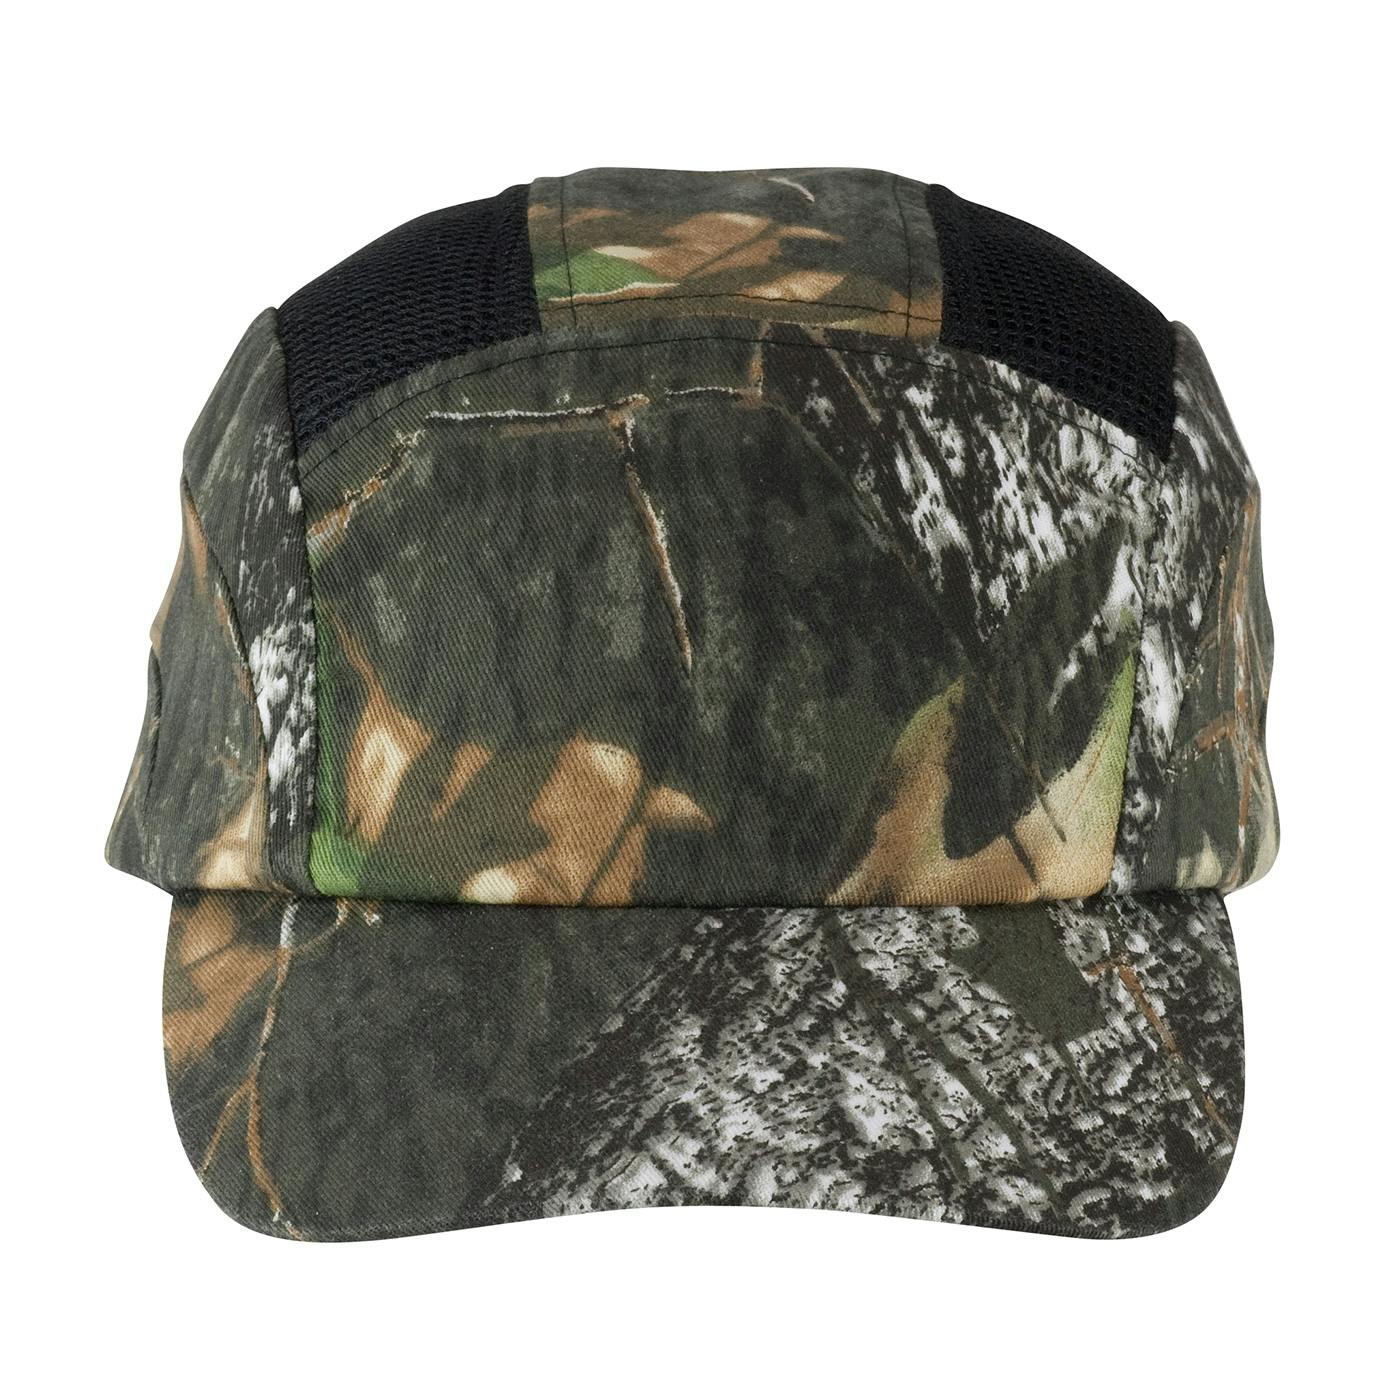 Camouflage Baseball Style Bump Cap with HDPE Protective Liner and Adjustable Back, Camouflage (282-ABR170-CAMO) - OS